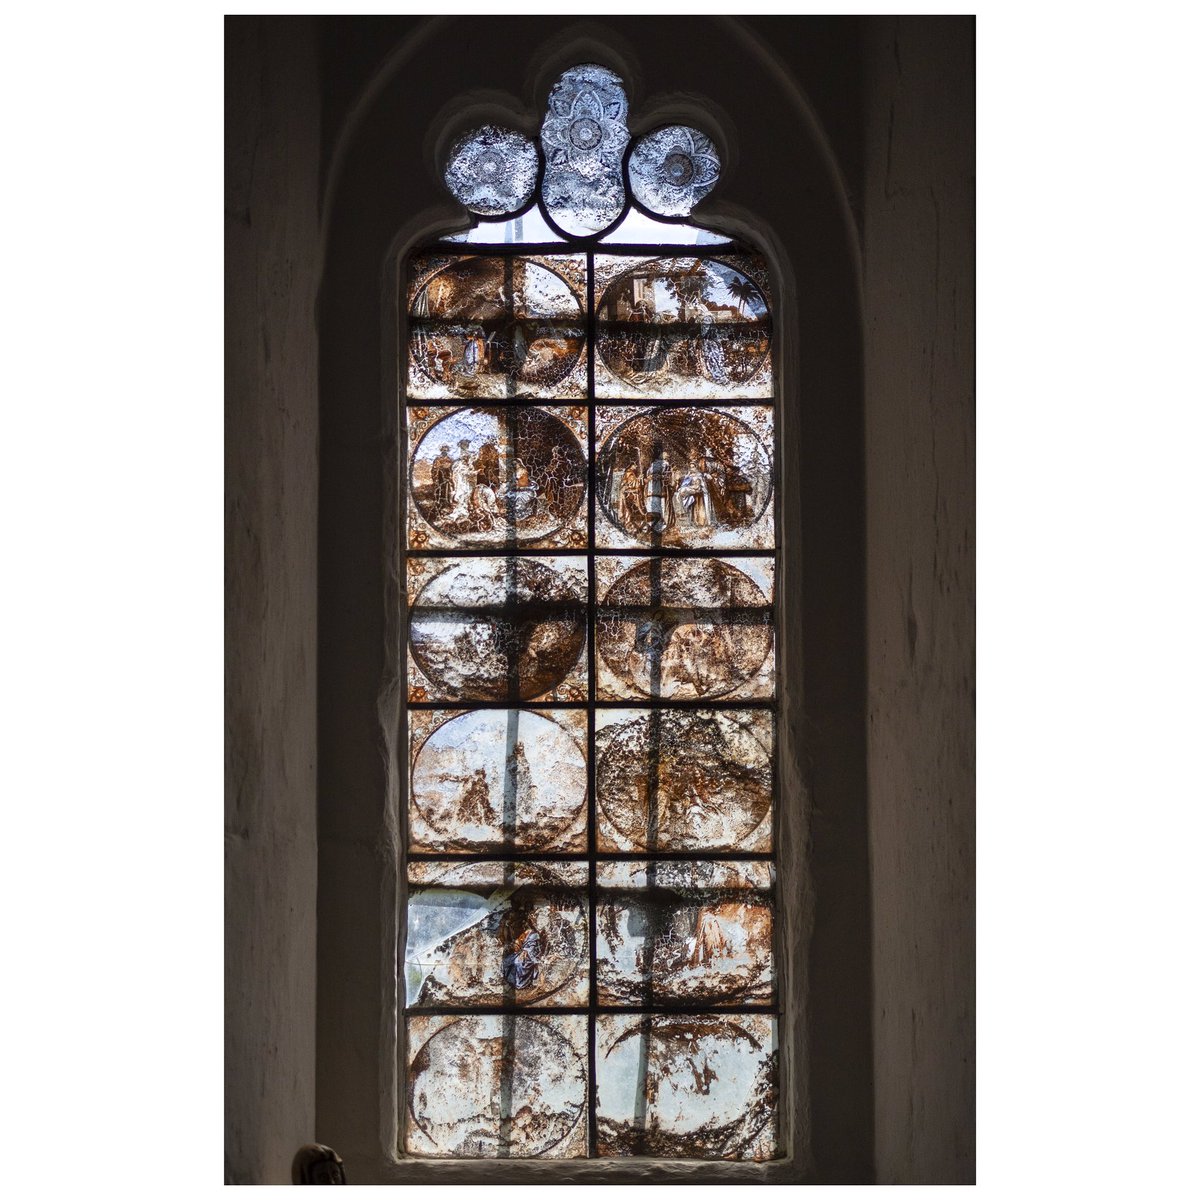 But the most intriguing part of this Hertfordshire church is one of the southeast windows. Twelve roundels depict scenes from the Life of Christ. But this isn’t stained or painted glass. It’s something I have never seen in a church before… glass transfer painting.2/7